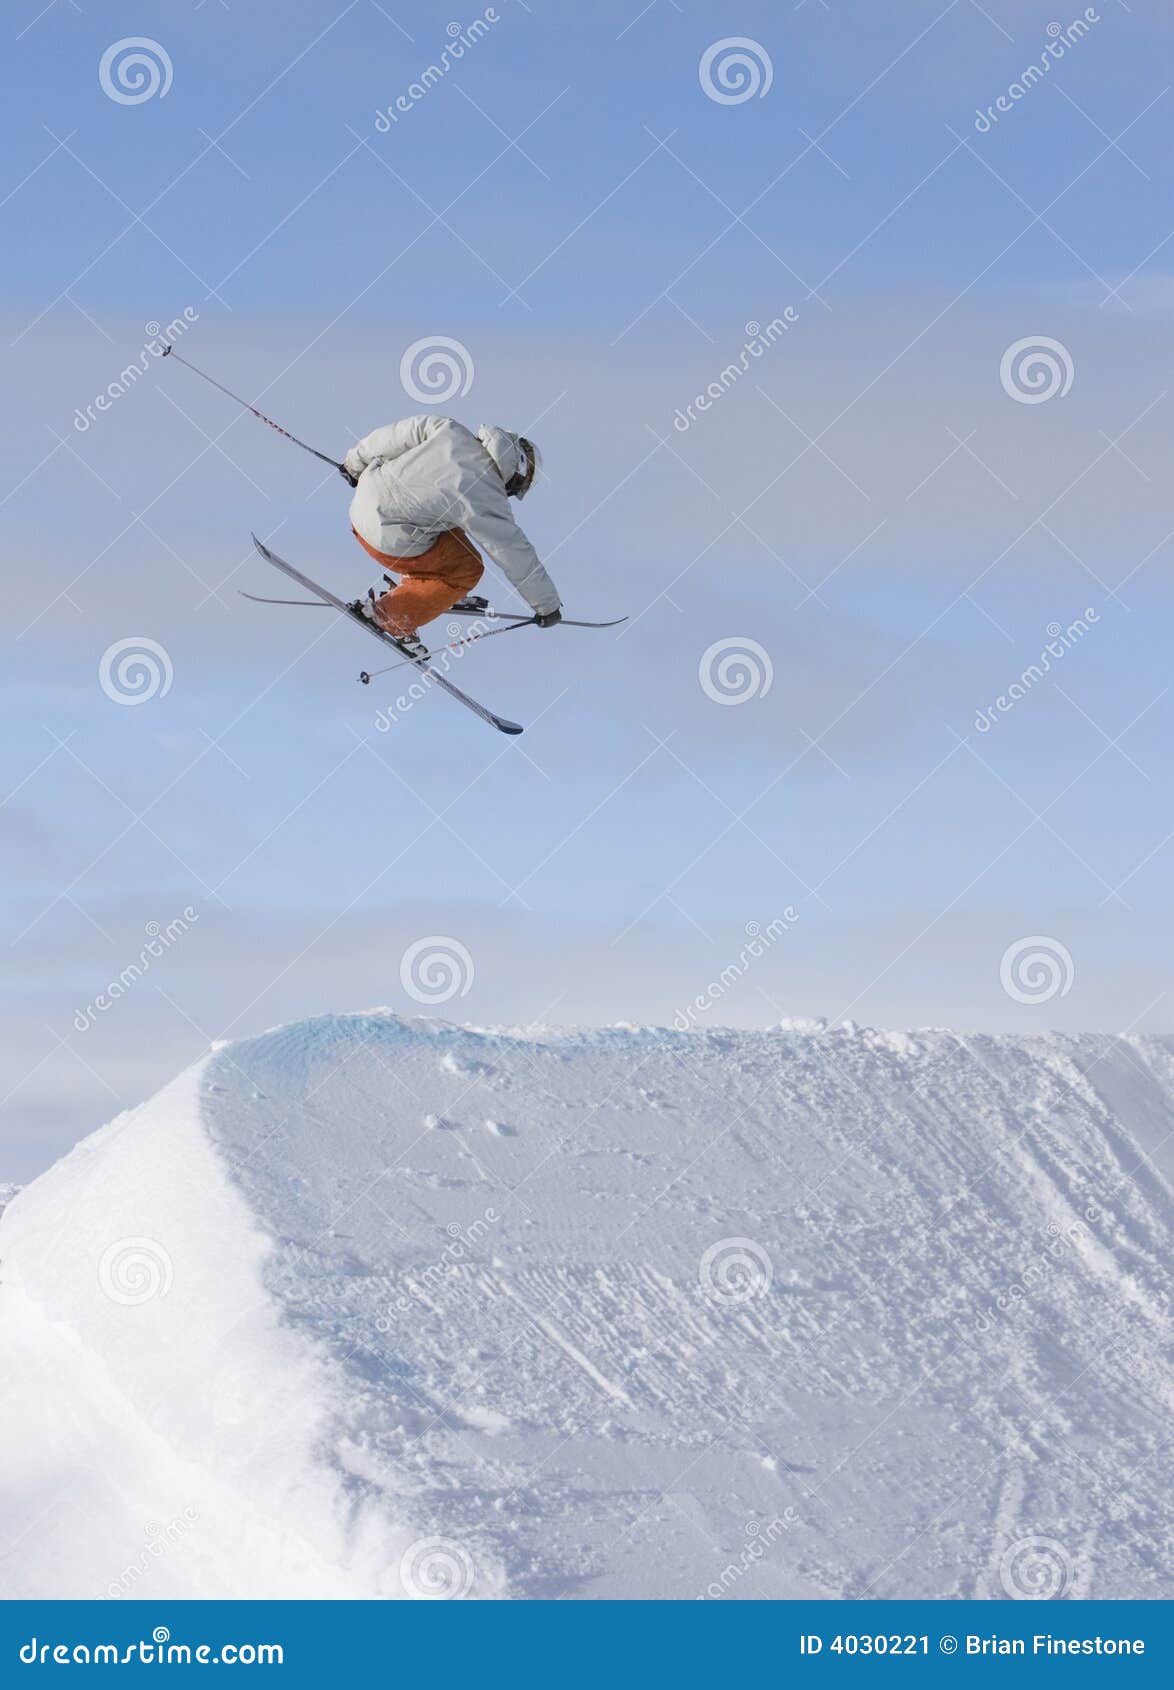 Skier Jump 360 Stock Image Image 4030221 with regard to The Incredible  how to ski 360 jump intended for Your own home